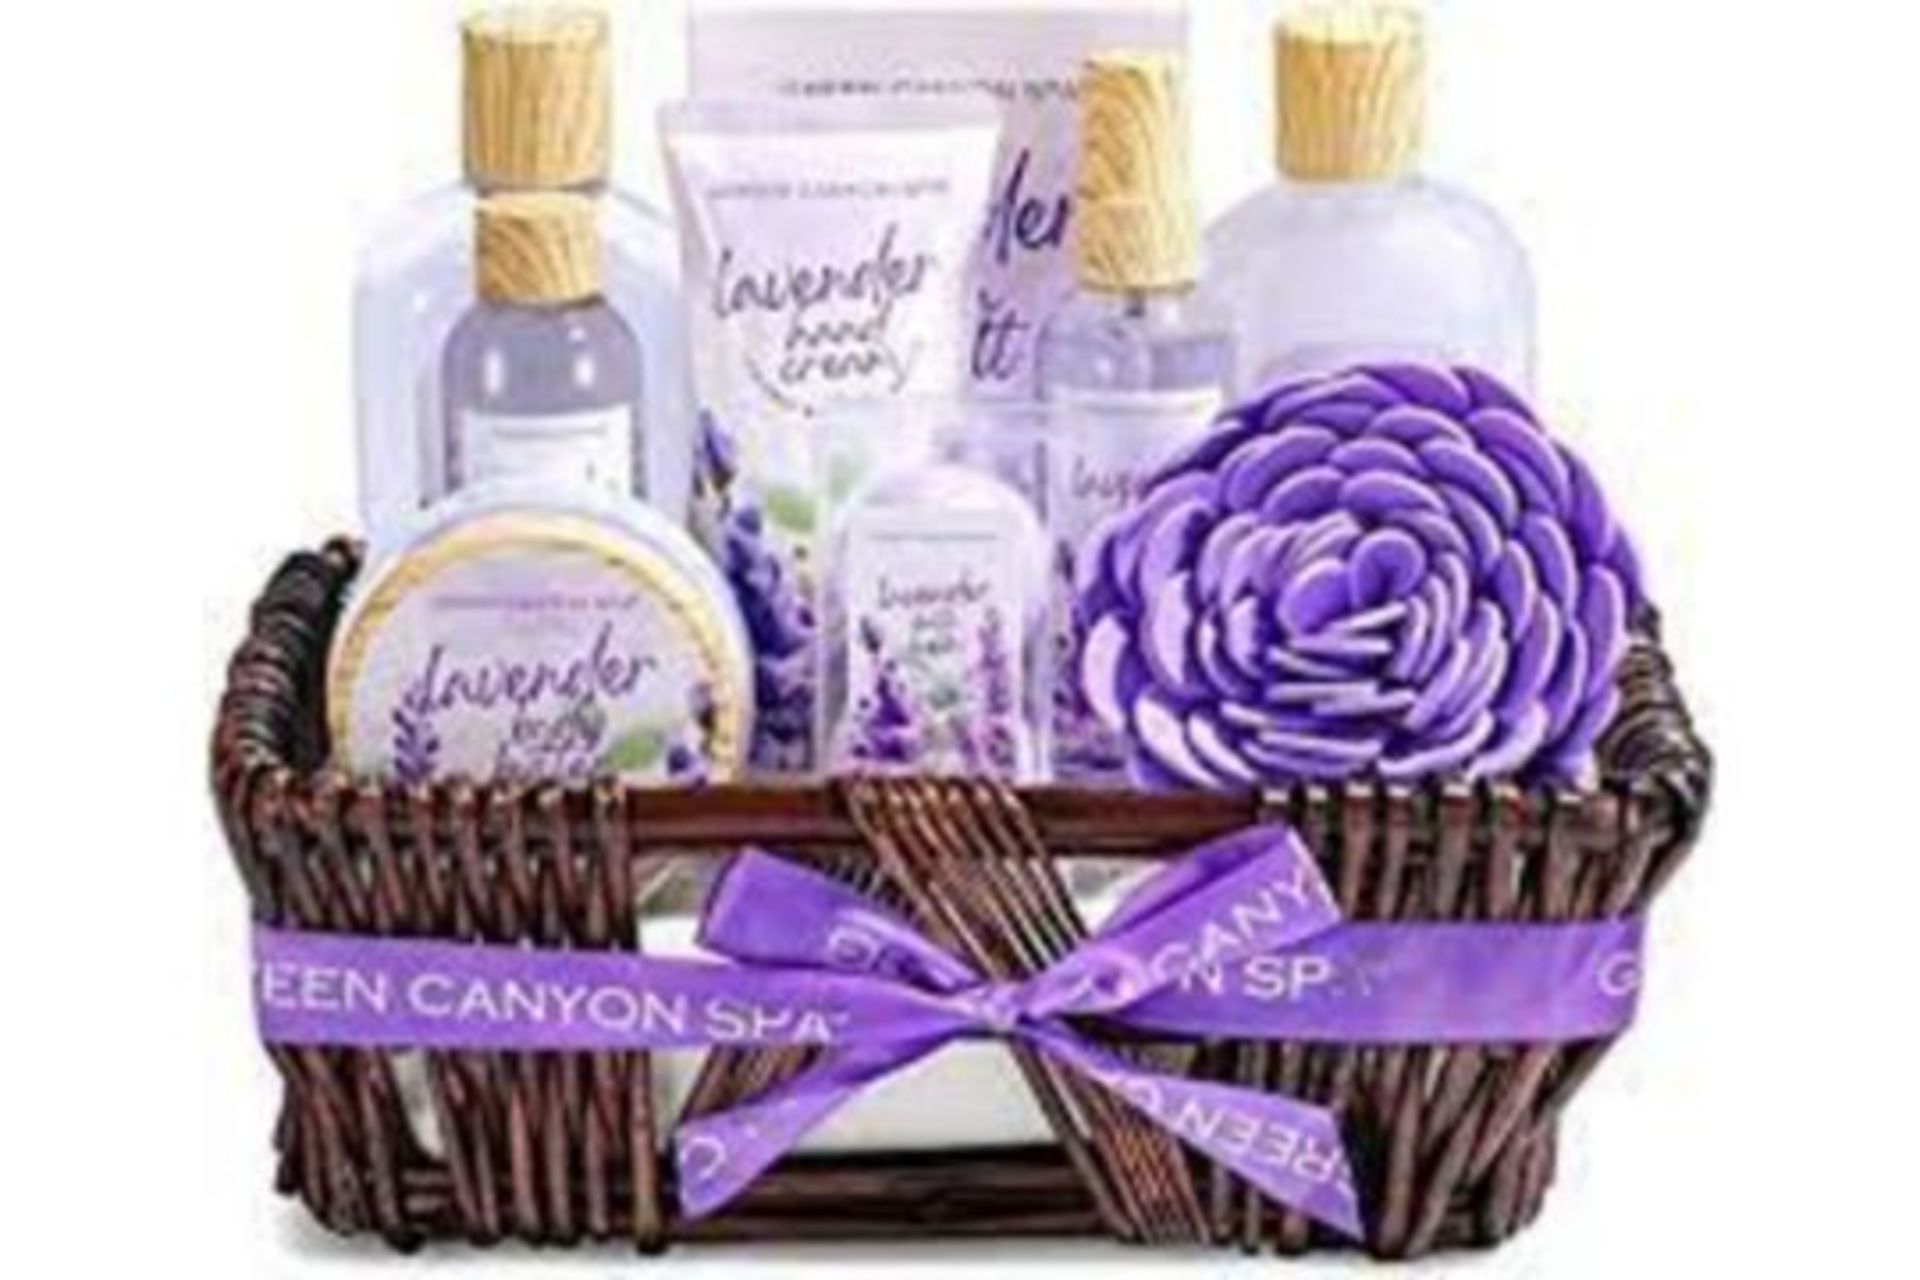 2 X NEW PACKAGED GREEN CANYON SPA Lavender Spa Gift Baskets for Women (GCS-BP-019-1)-12 Pcs Lavender